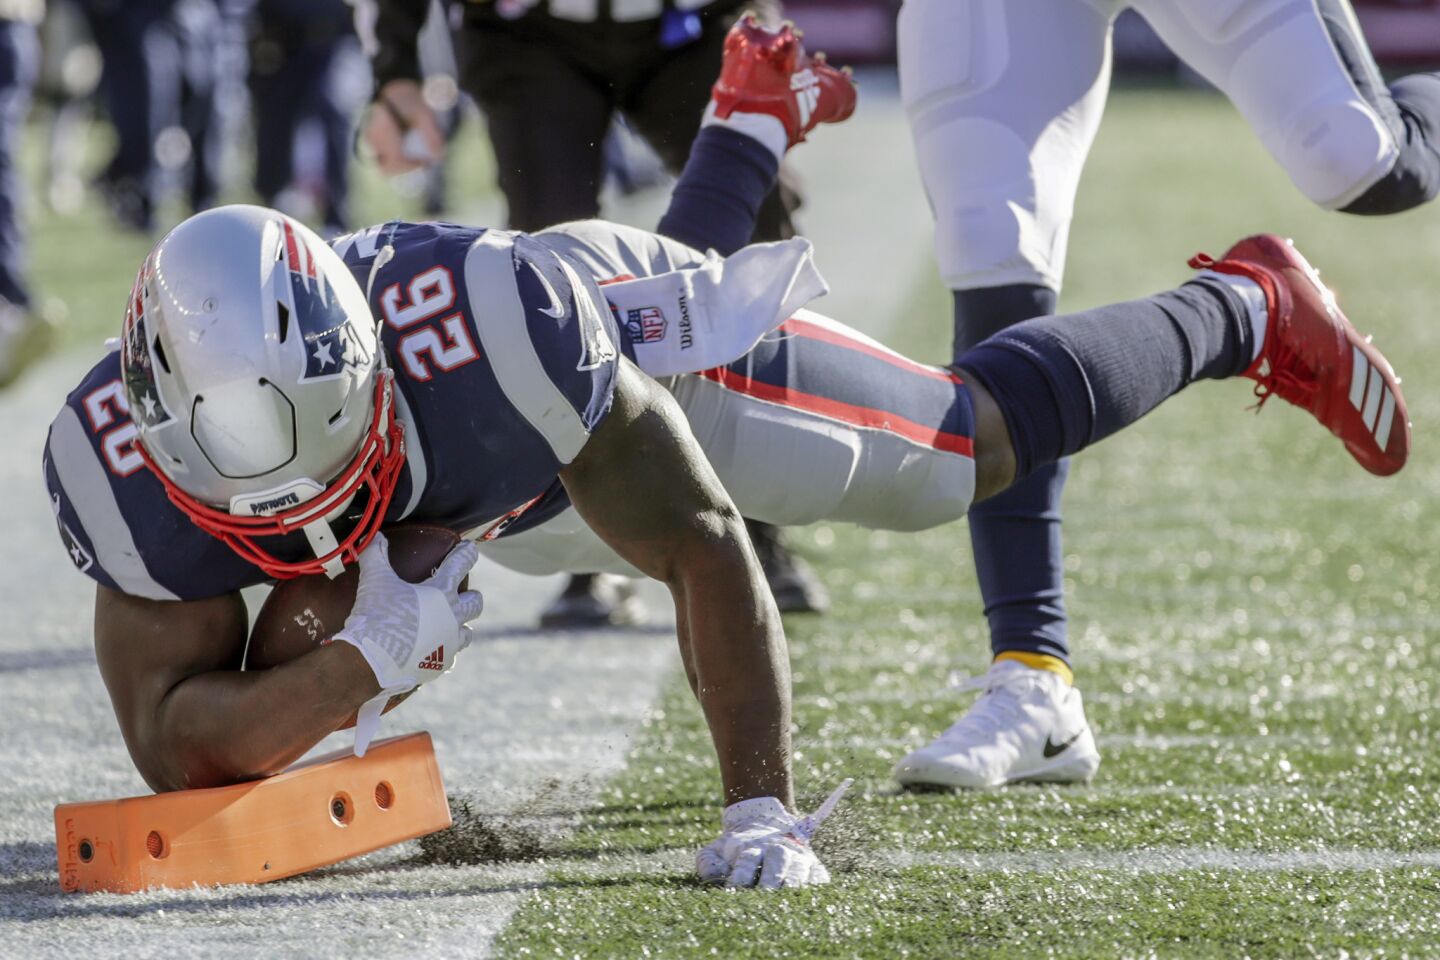 New England Patriots running back Sony Michel dives in for a touchdown early in the first quarter against the Chargers in the NFL AFC Divisional Playoff at Gillette Stadium on Sunday.